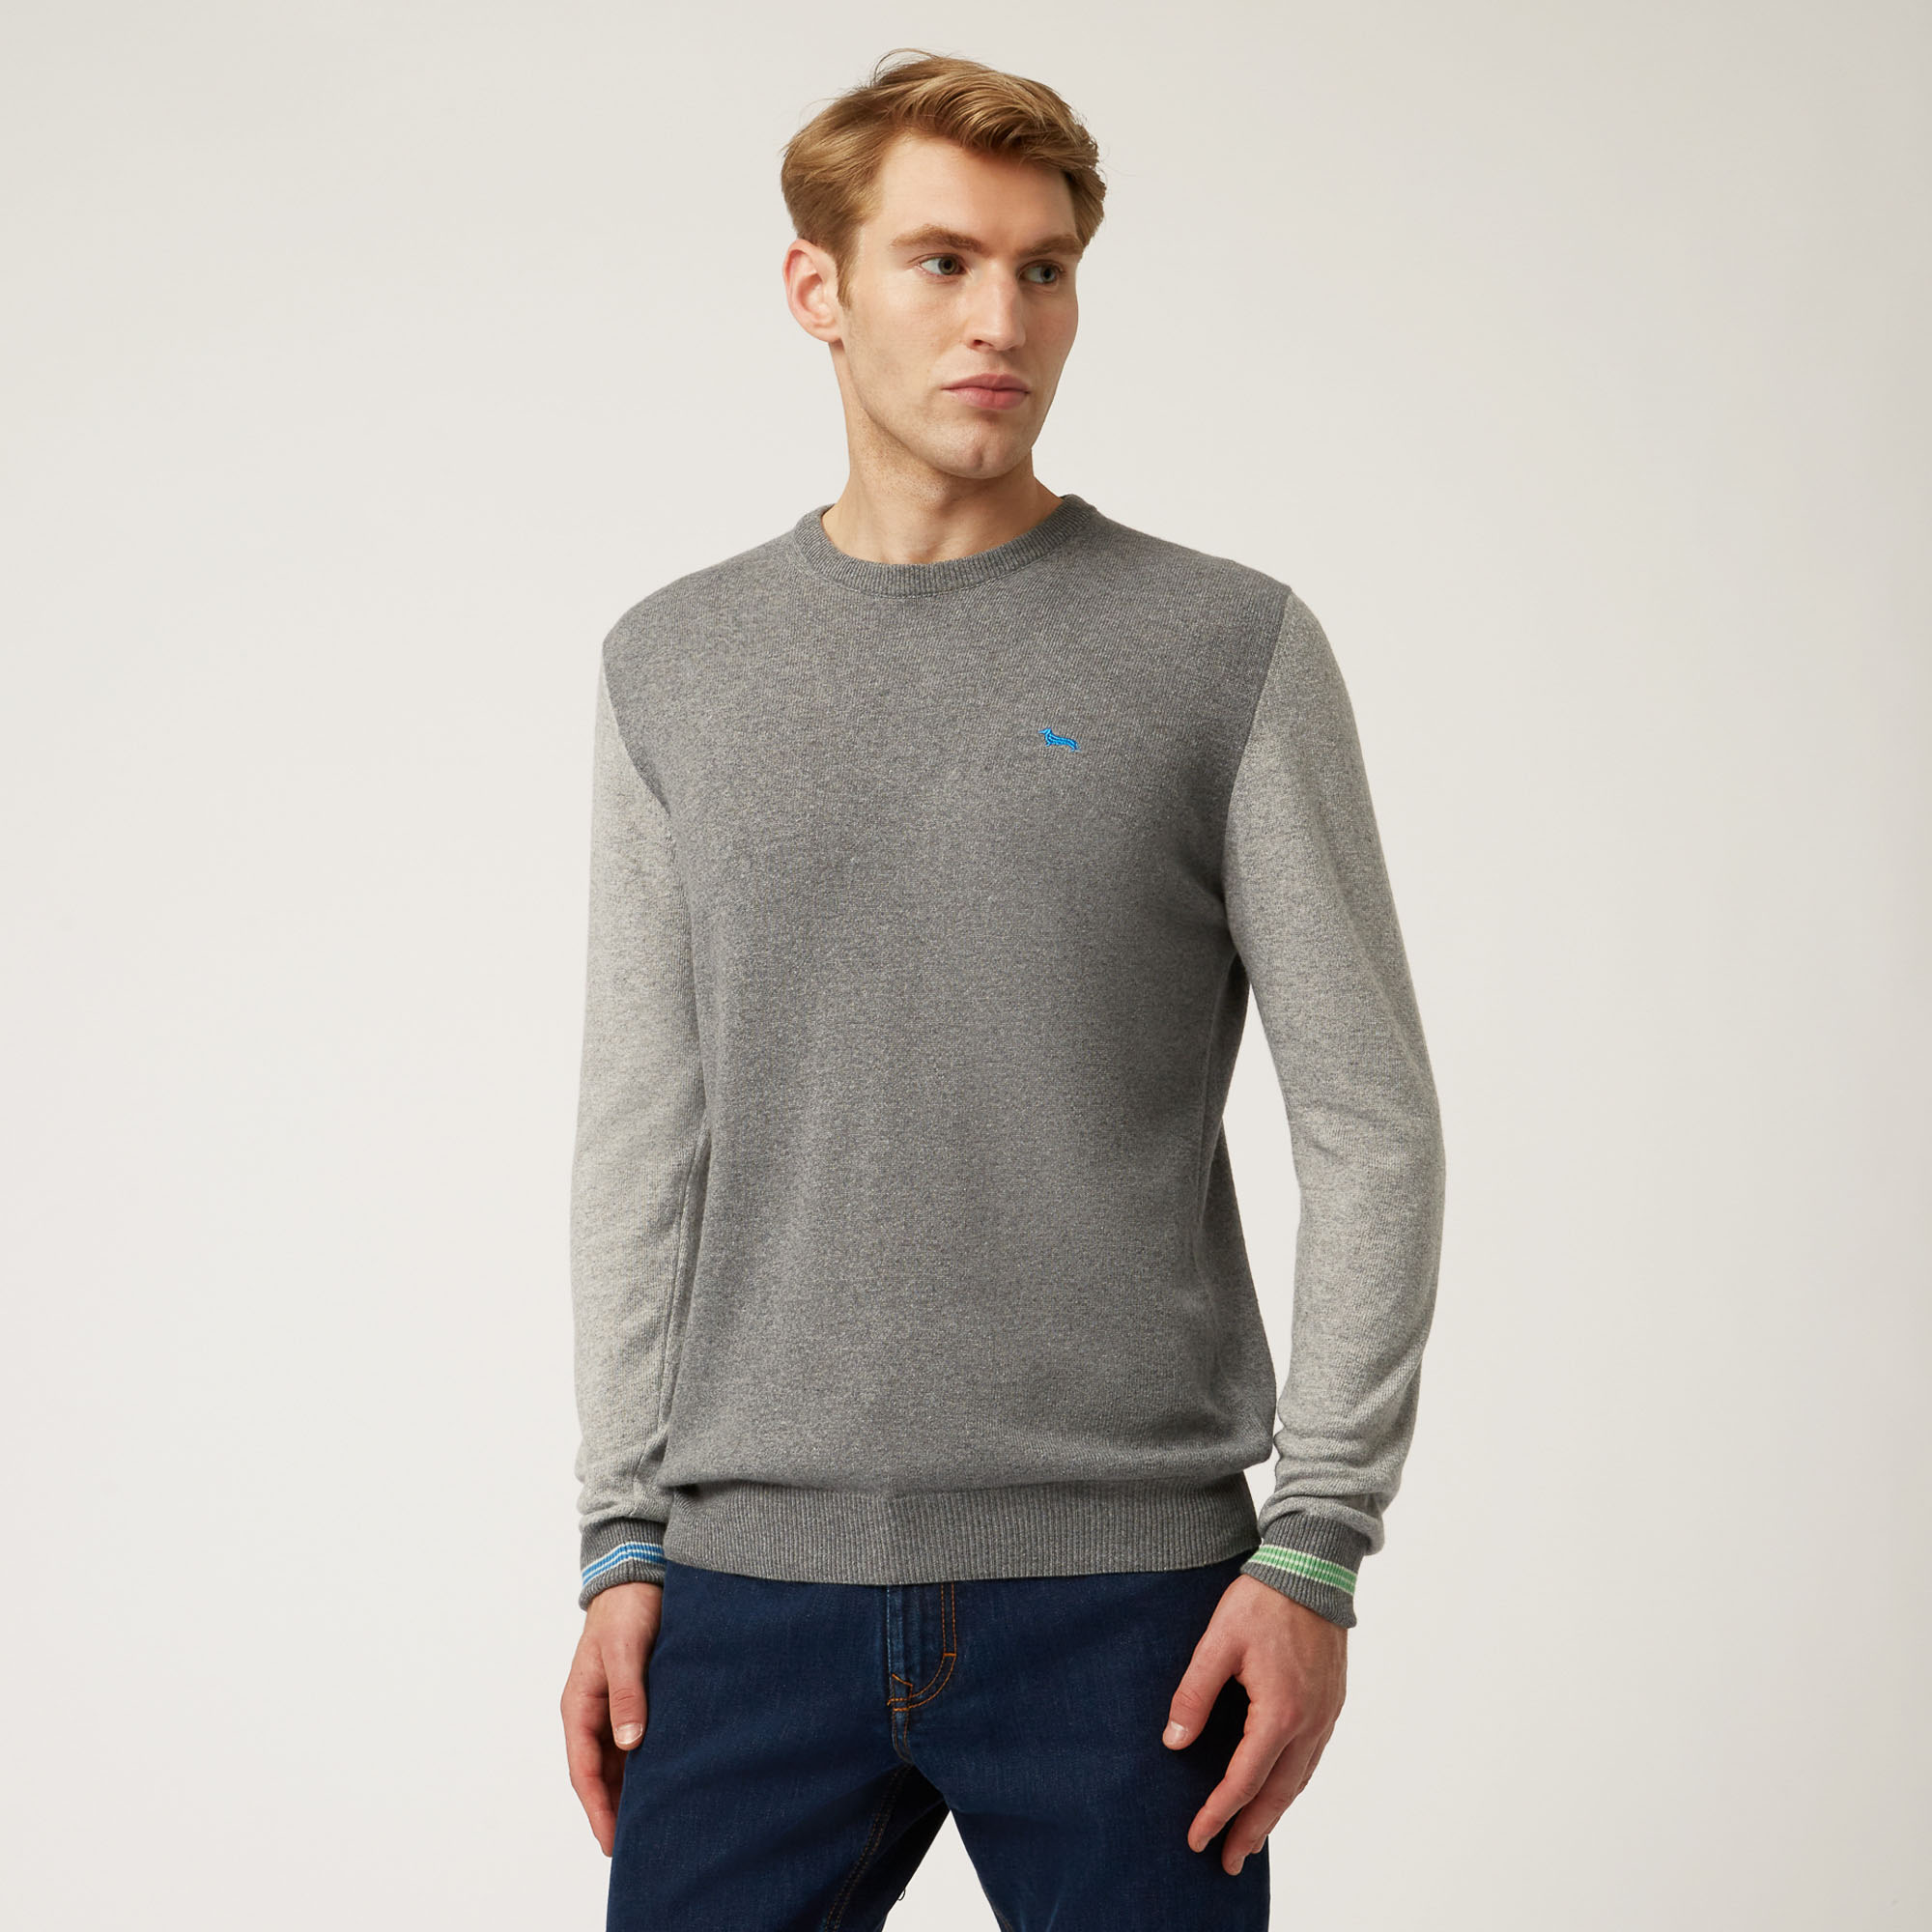 Crew-Neck Pullover With Shirt-Fabric Insert, Gray, large